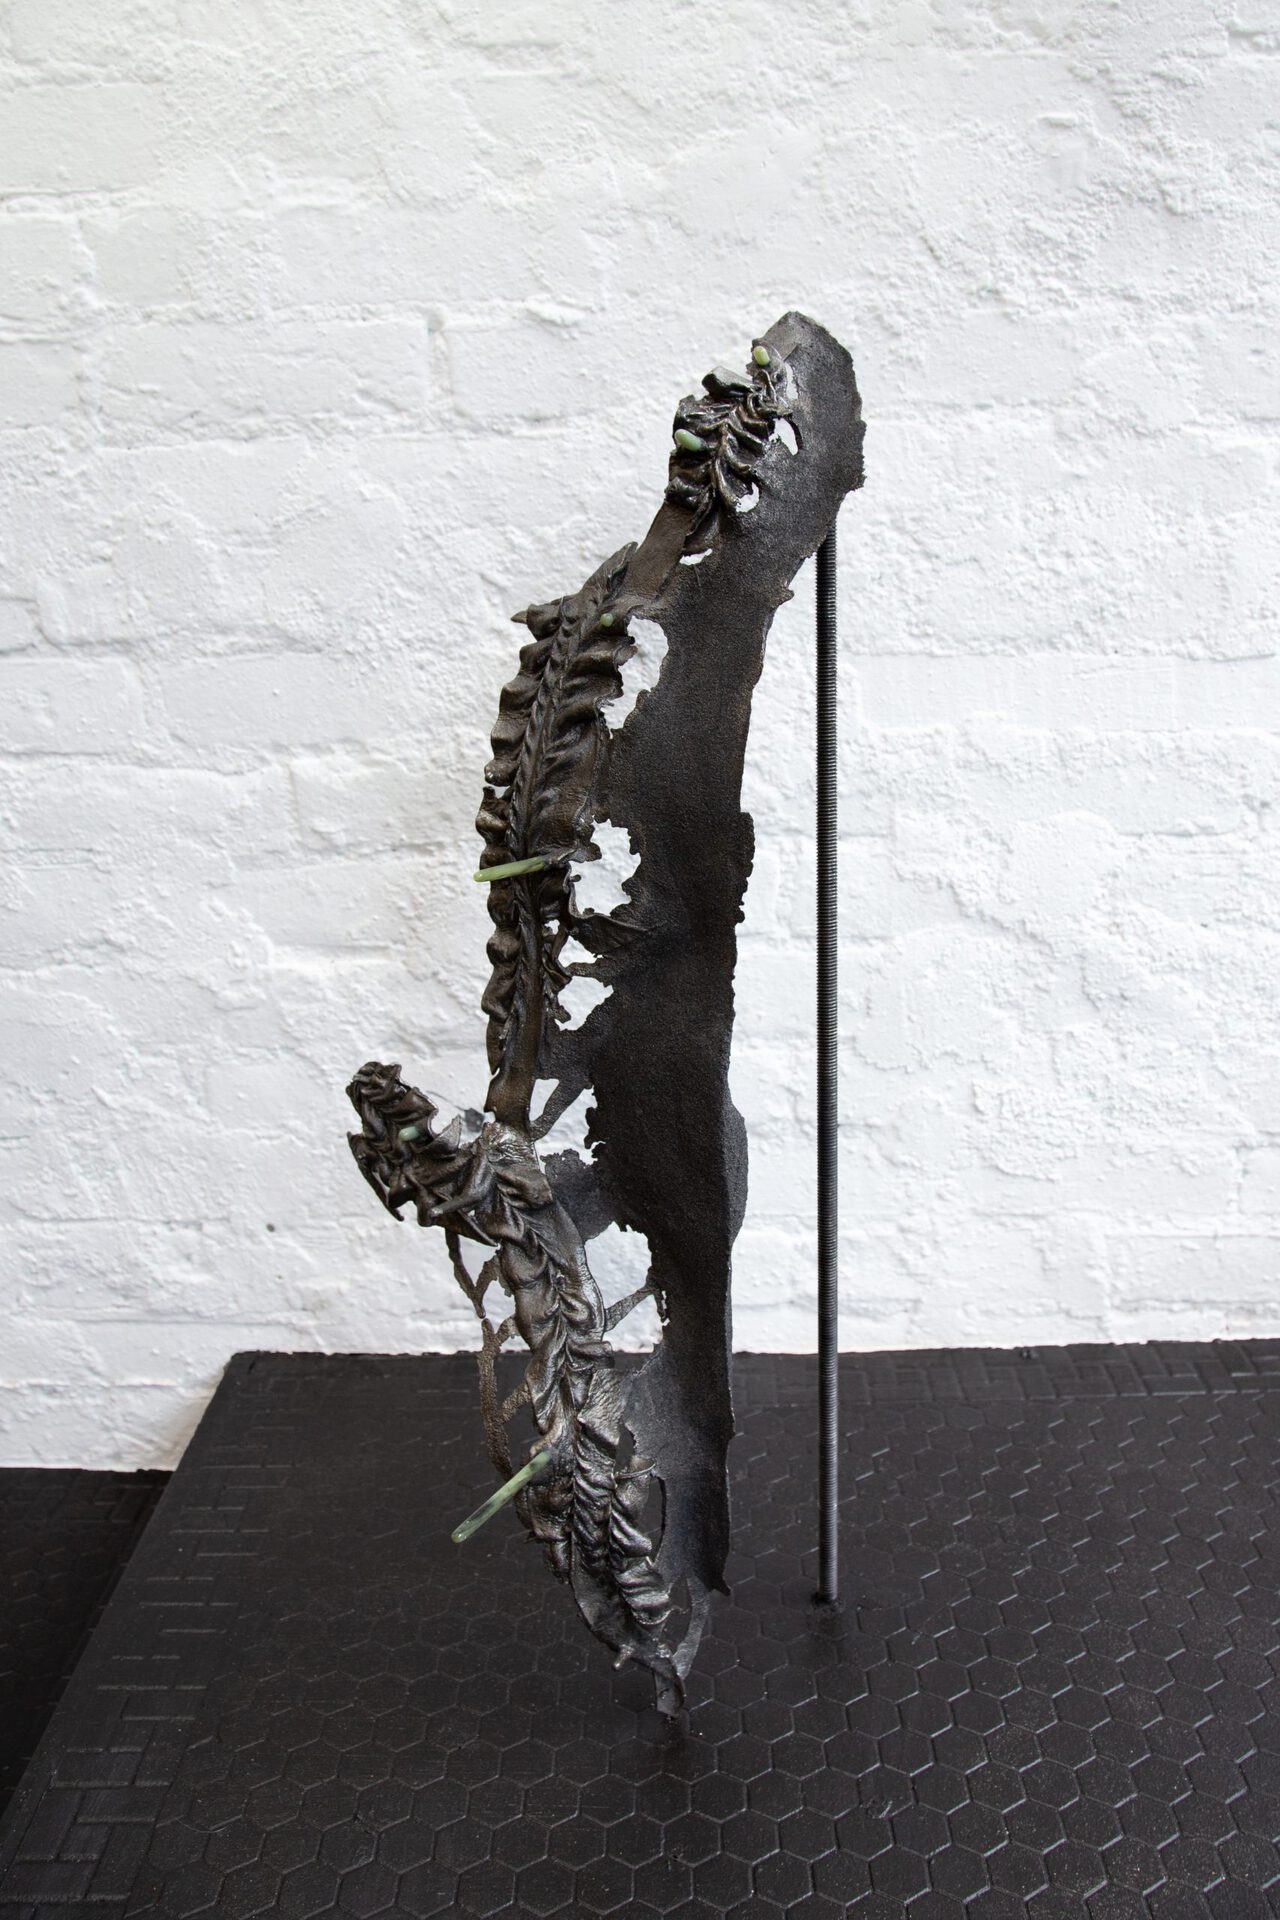 Alice Gong Xiaowen, "…where the echo is able to give, in its own language, the reverberation of the work in the alien one." (stilt, low), 2019-2022, Cast iron, soapstone, stainless steel, 38 x 18 x 100 Inches